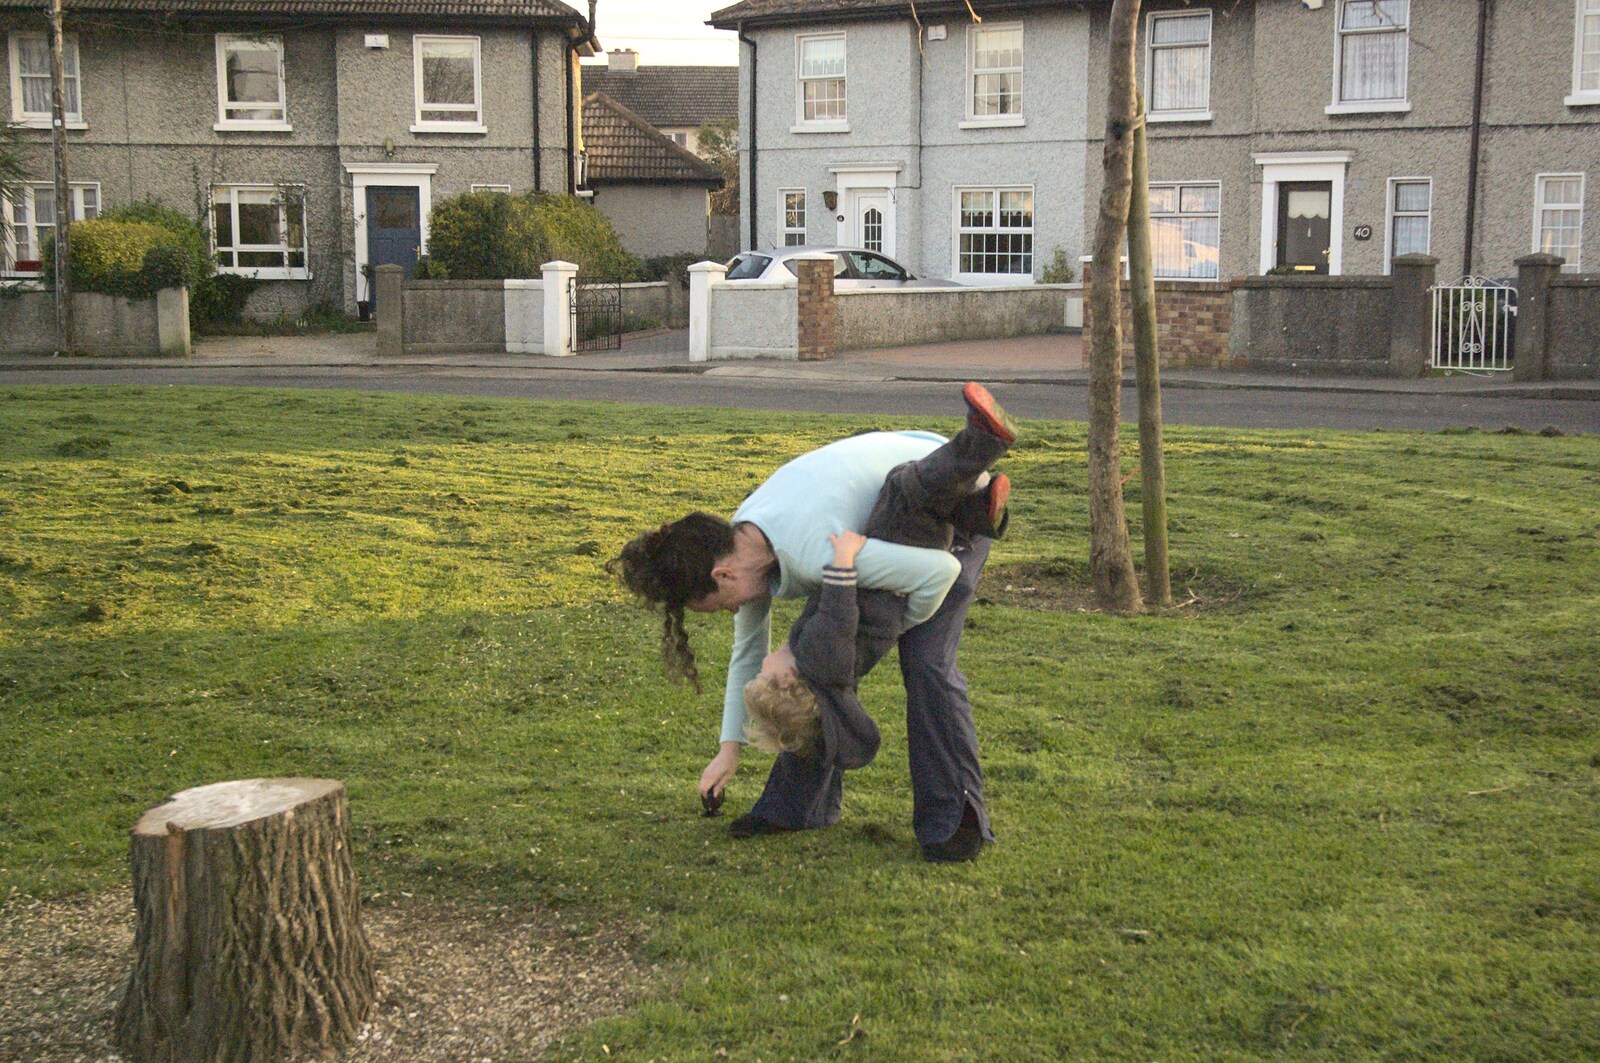 Messing around on the grass from A Week in Monkstown, County Dublin, Ireland - 1st March 2011